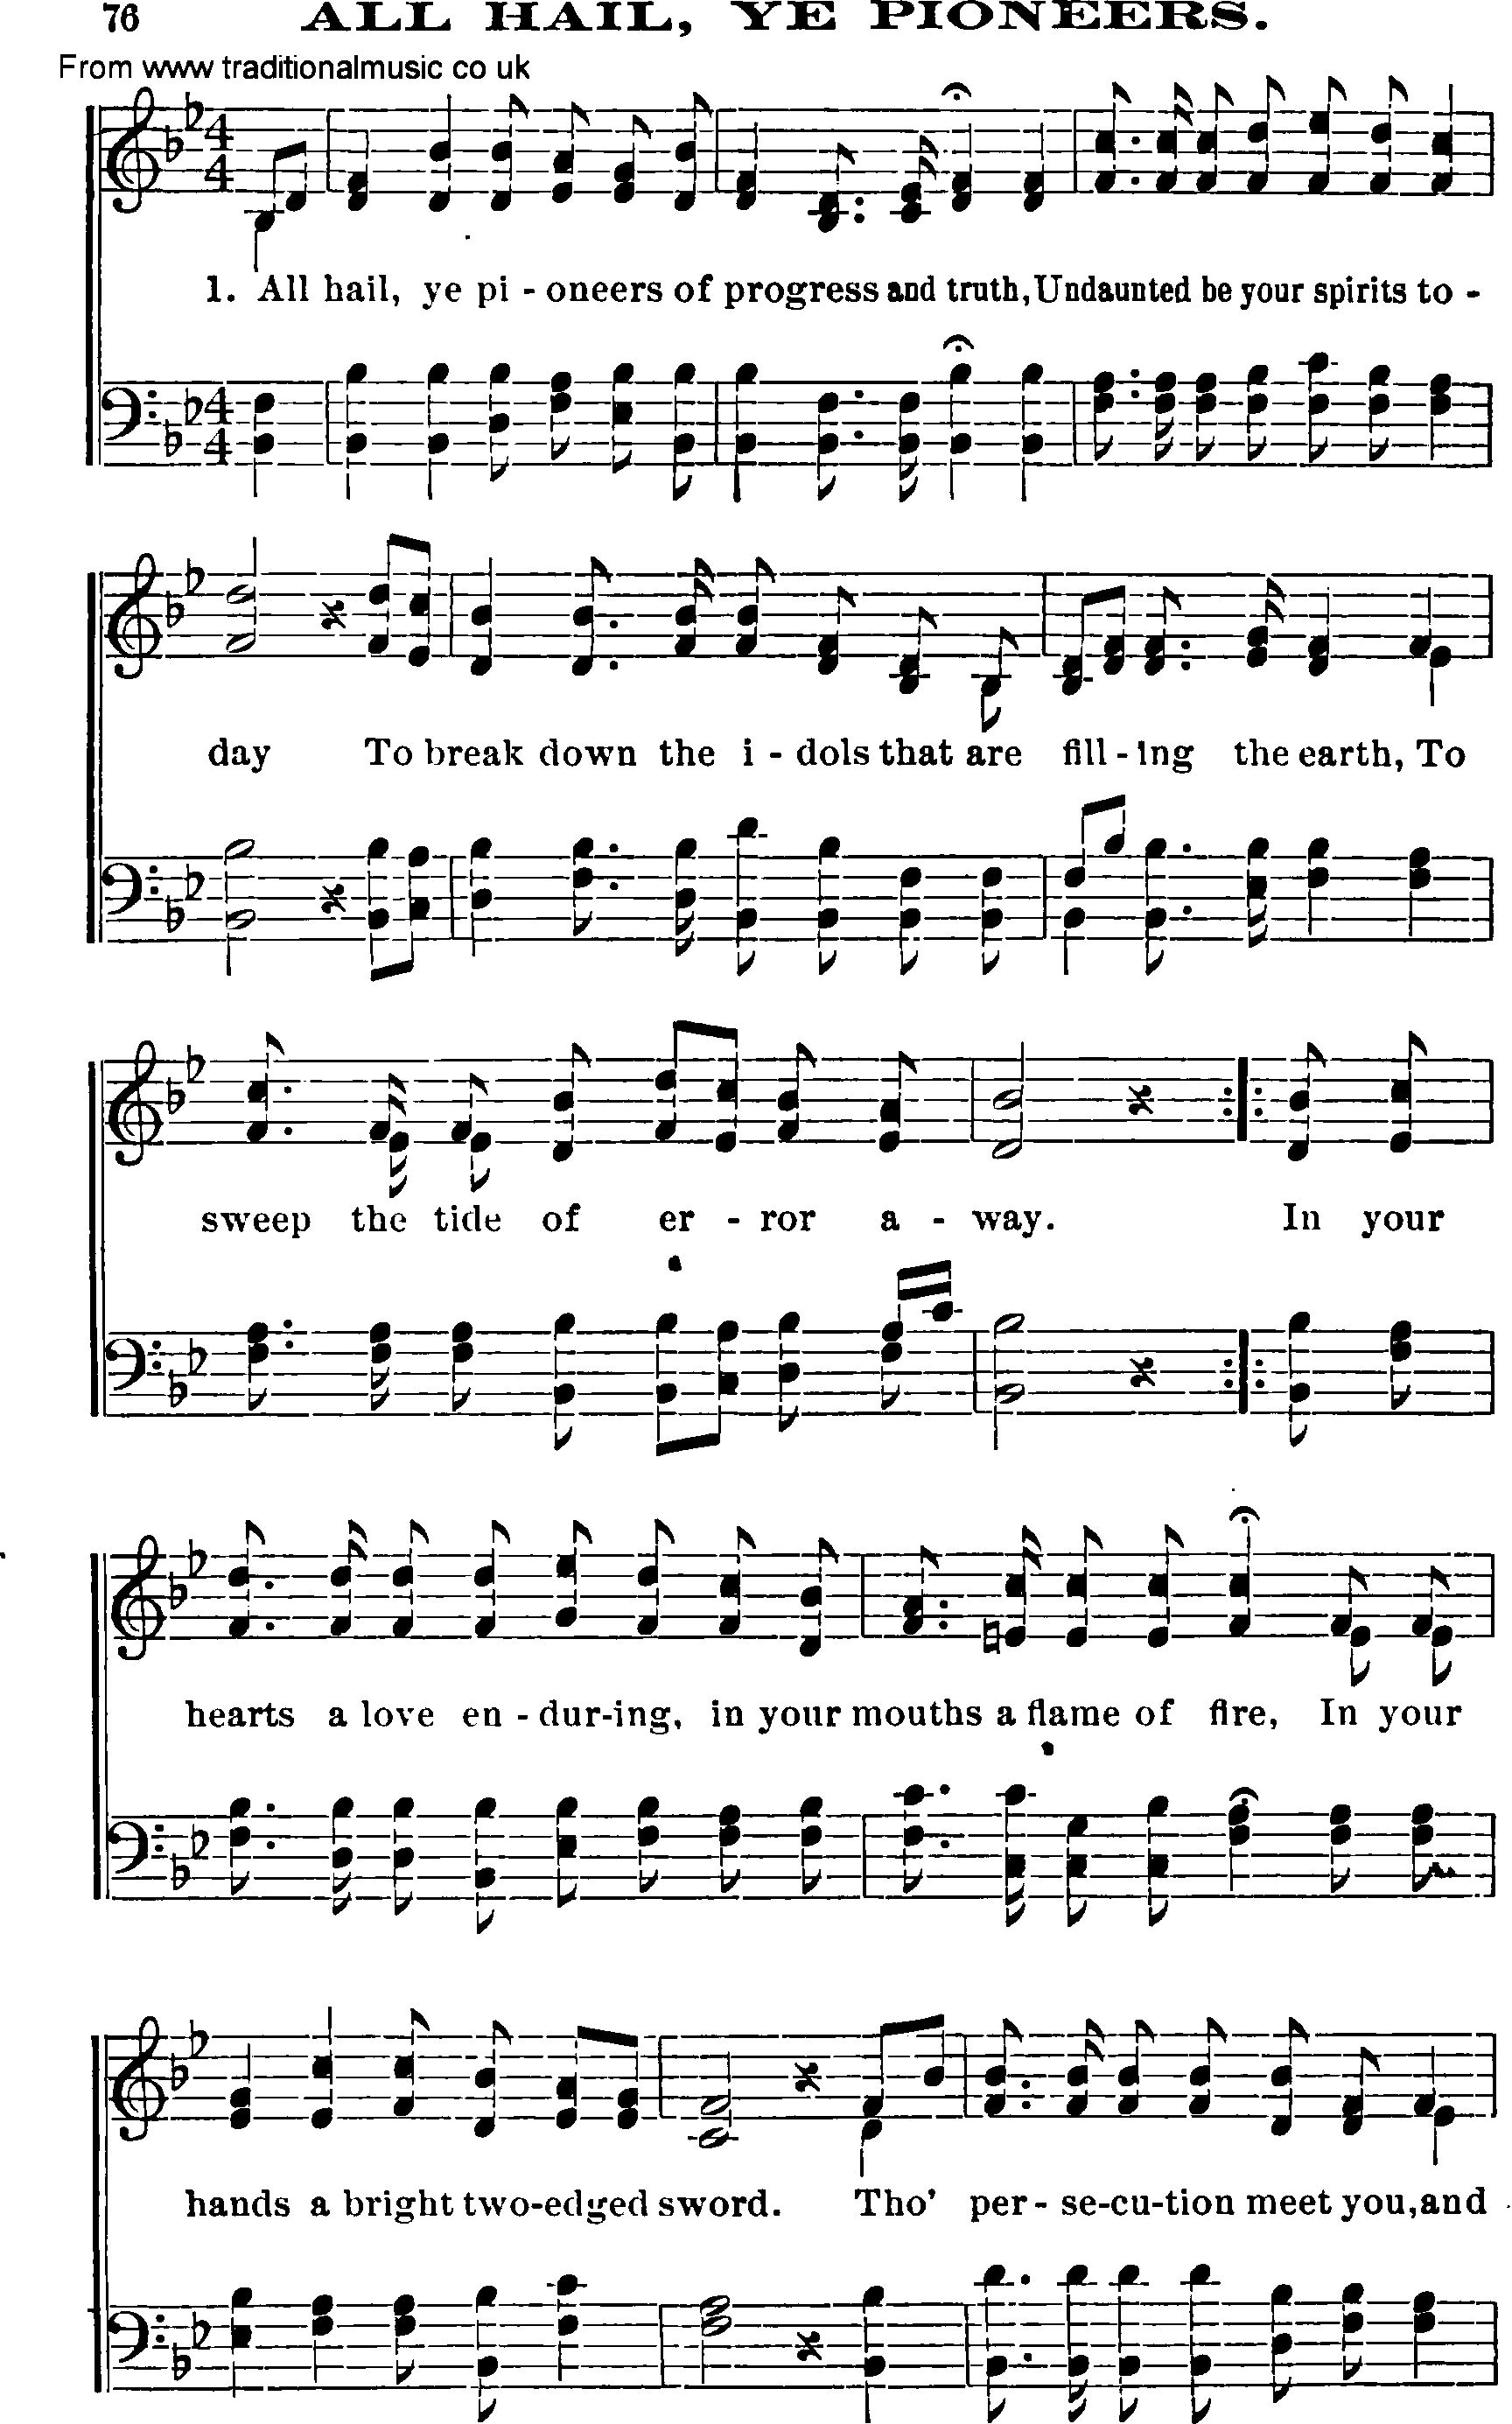 Shaker Music collection, Hymn: all hail ye pioneers, sheetmusic and PDF